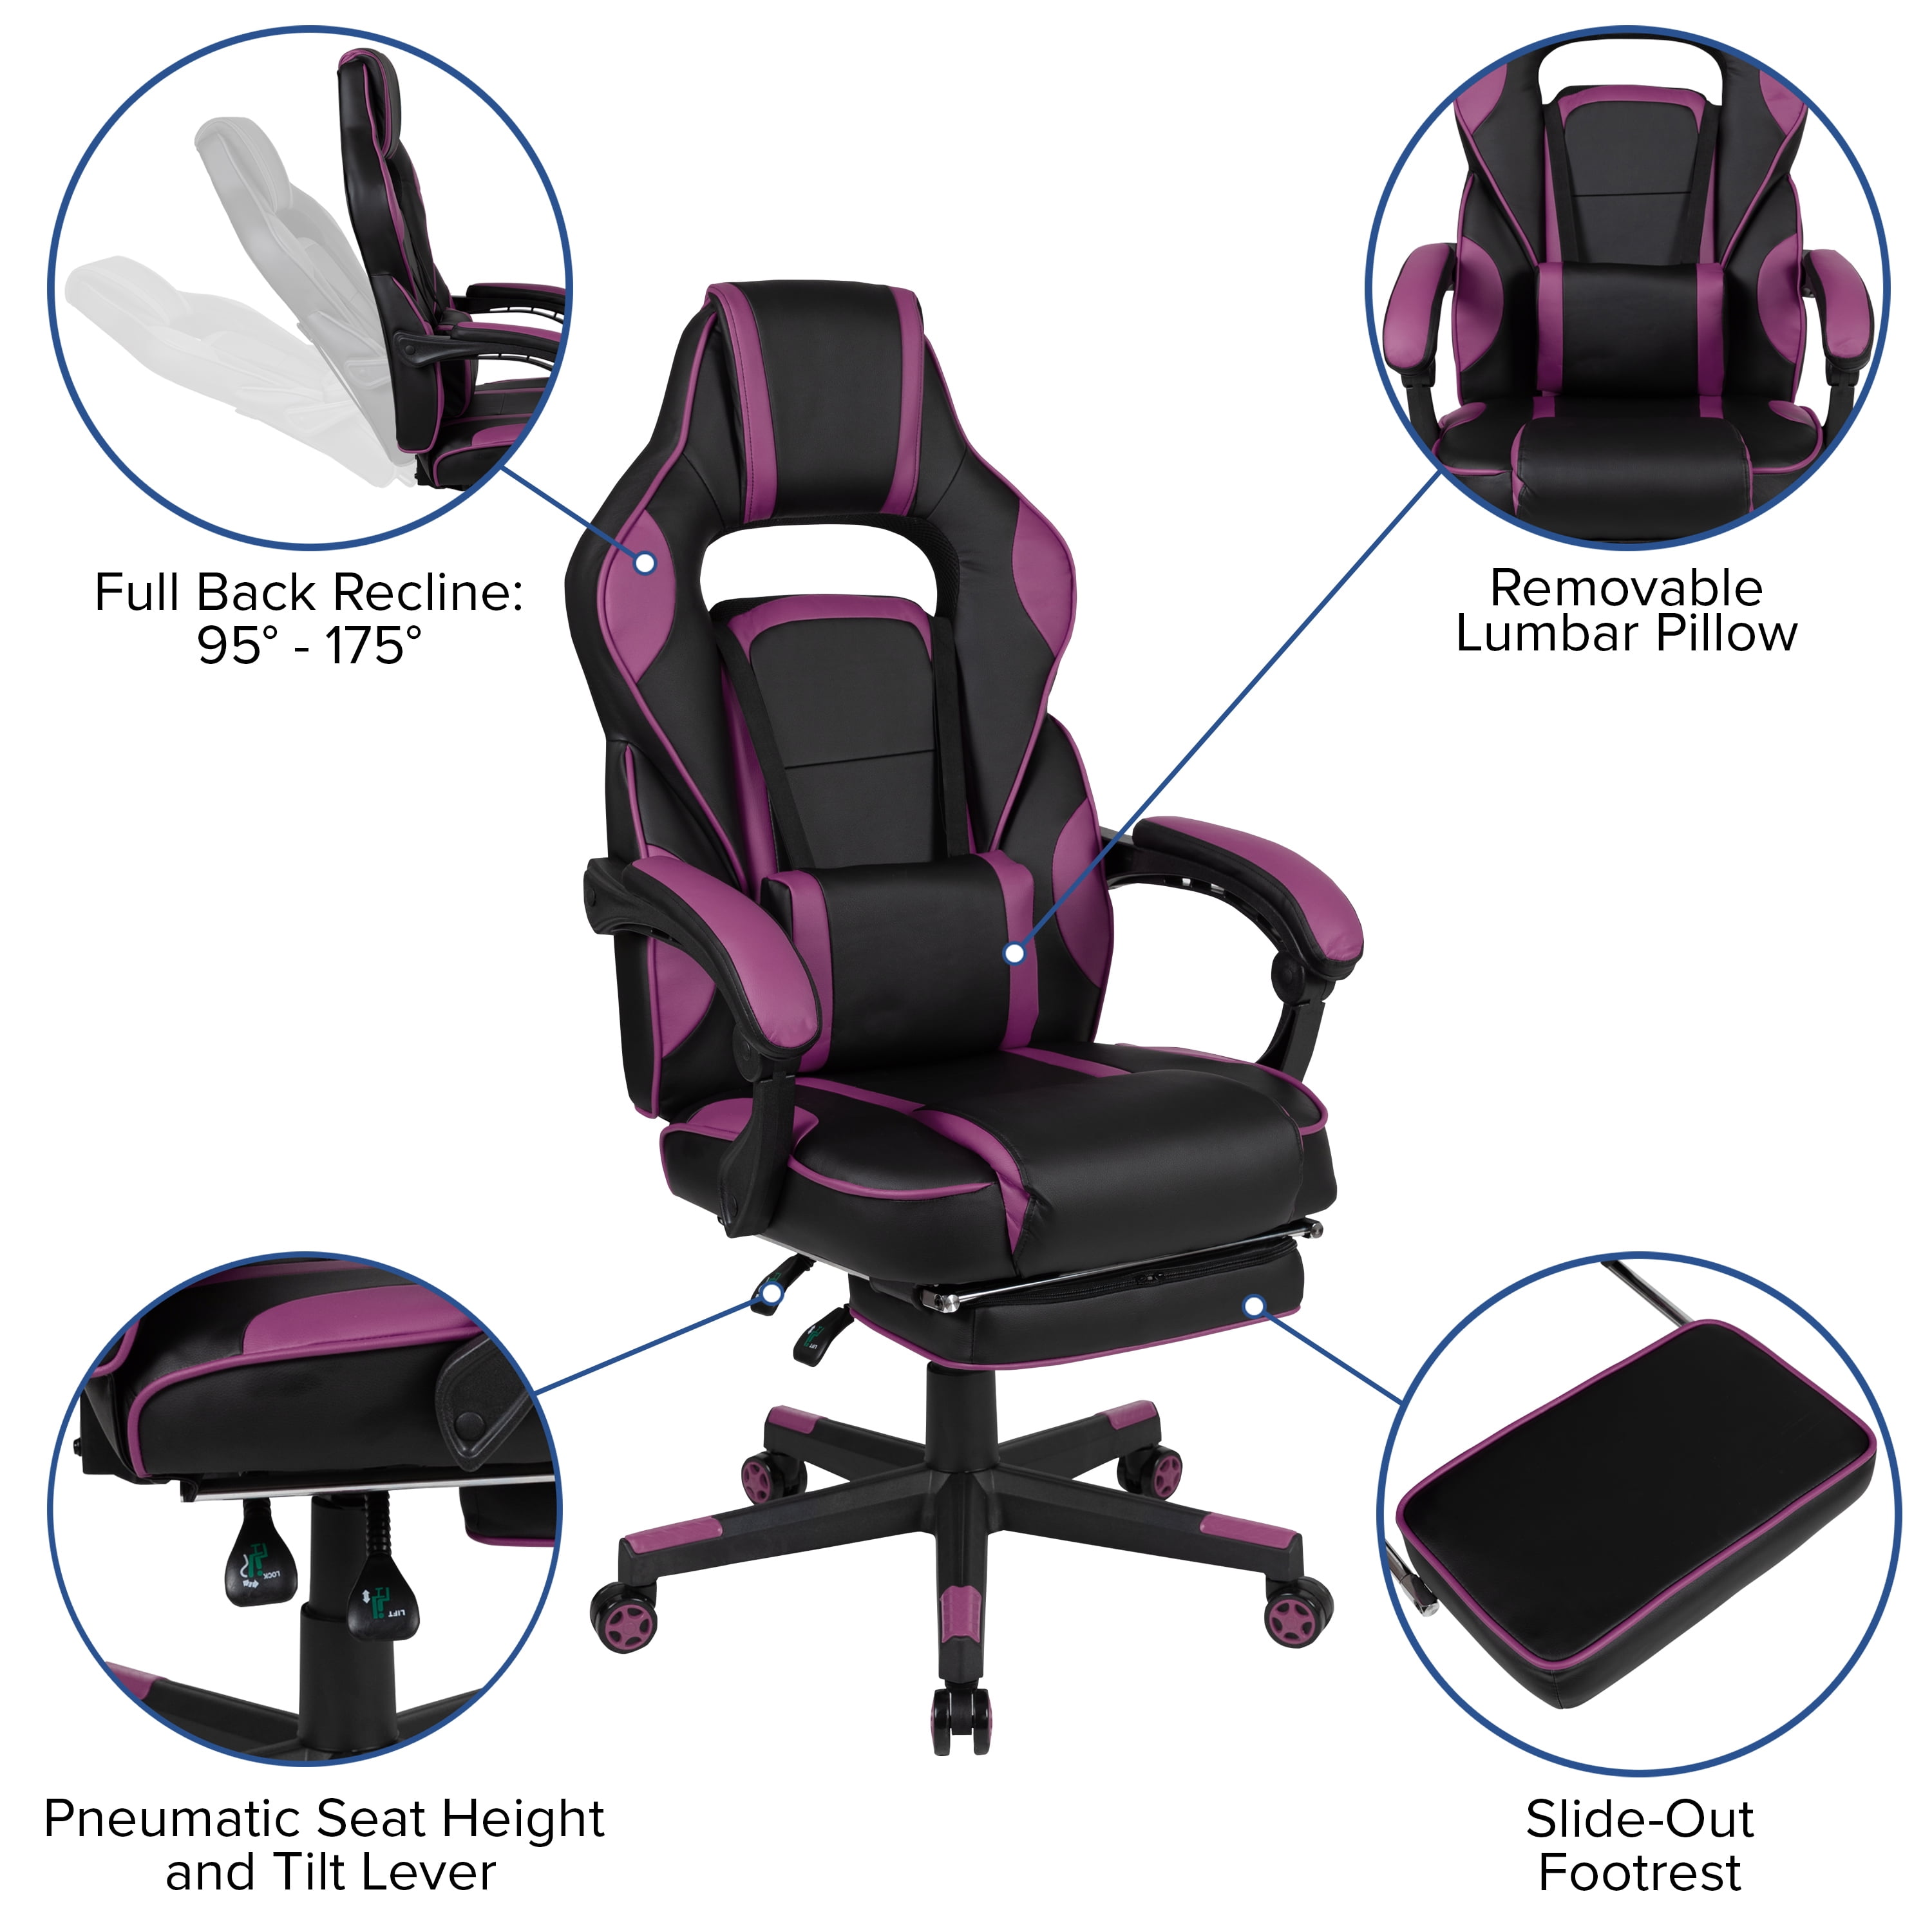 How To Install The Pillows On A Gaming Chair! Full HD 60 Fps